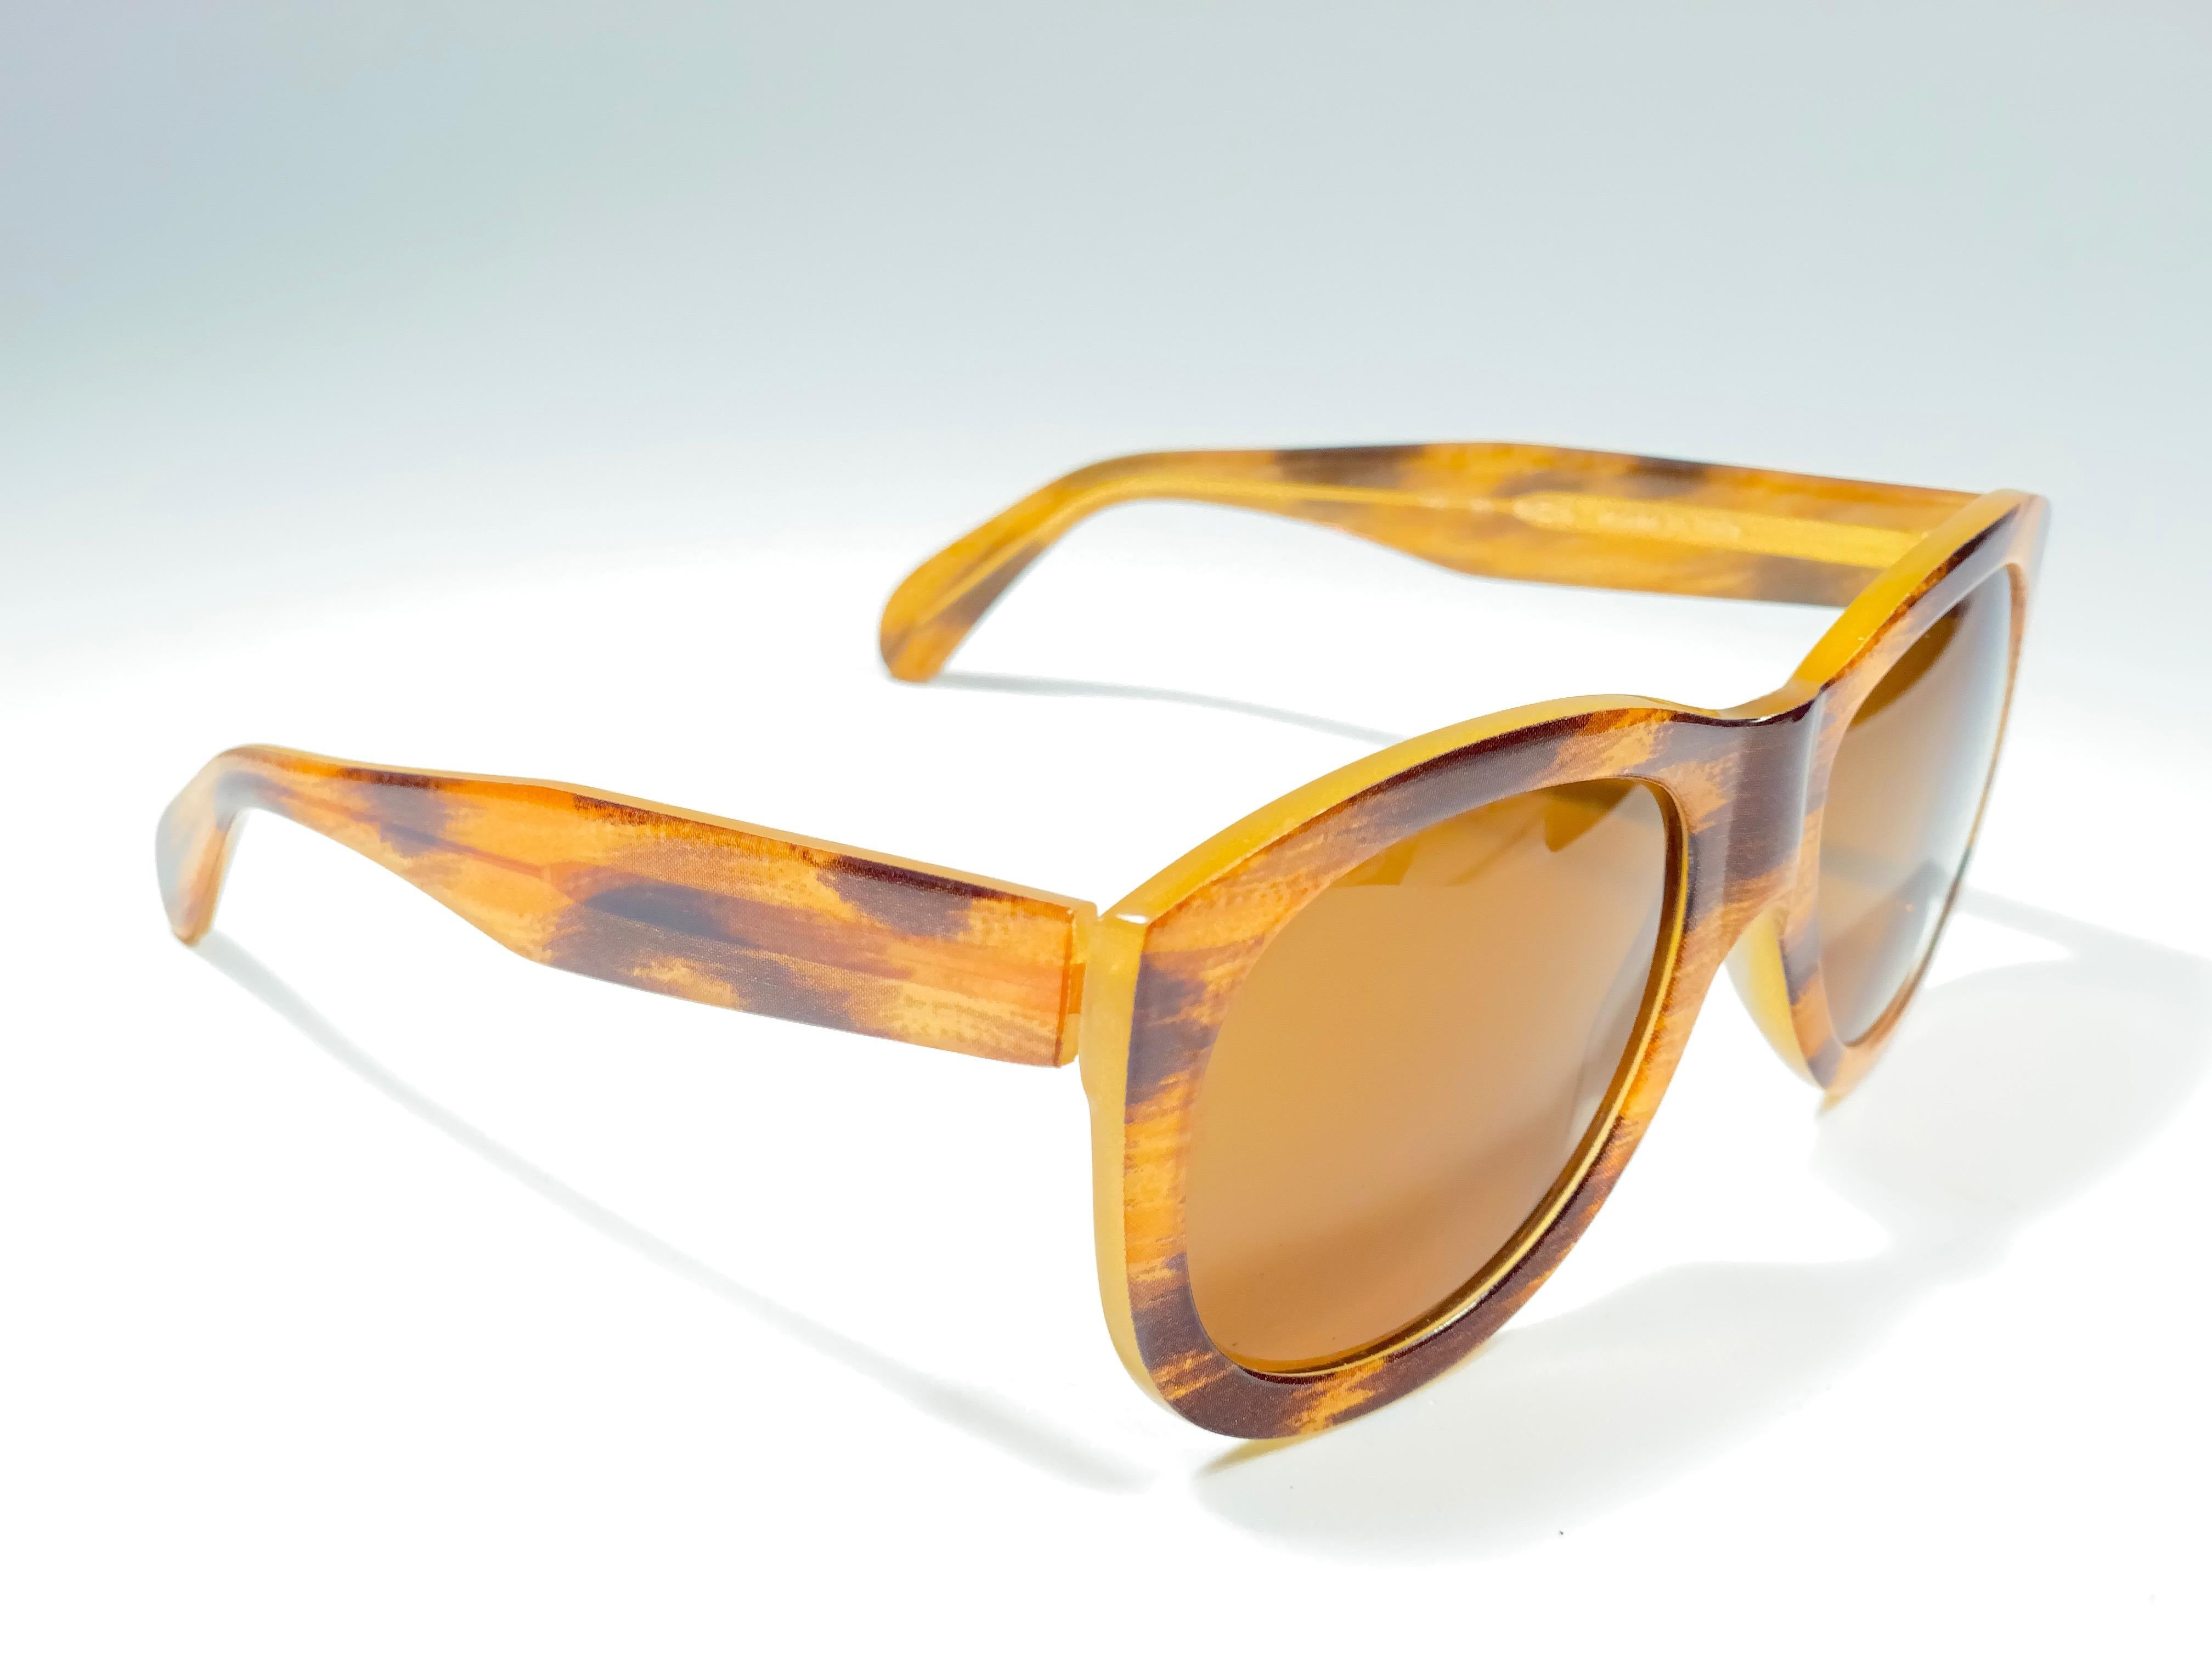 Vintage Moschino M252 By Persol Blond Oversized Sunglasses, 1990  In New Condition For Sale In Baleares, Baleares